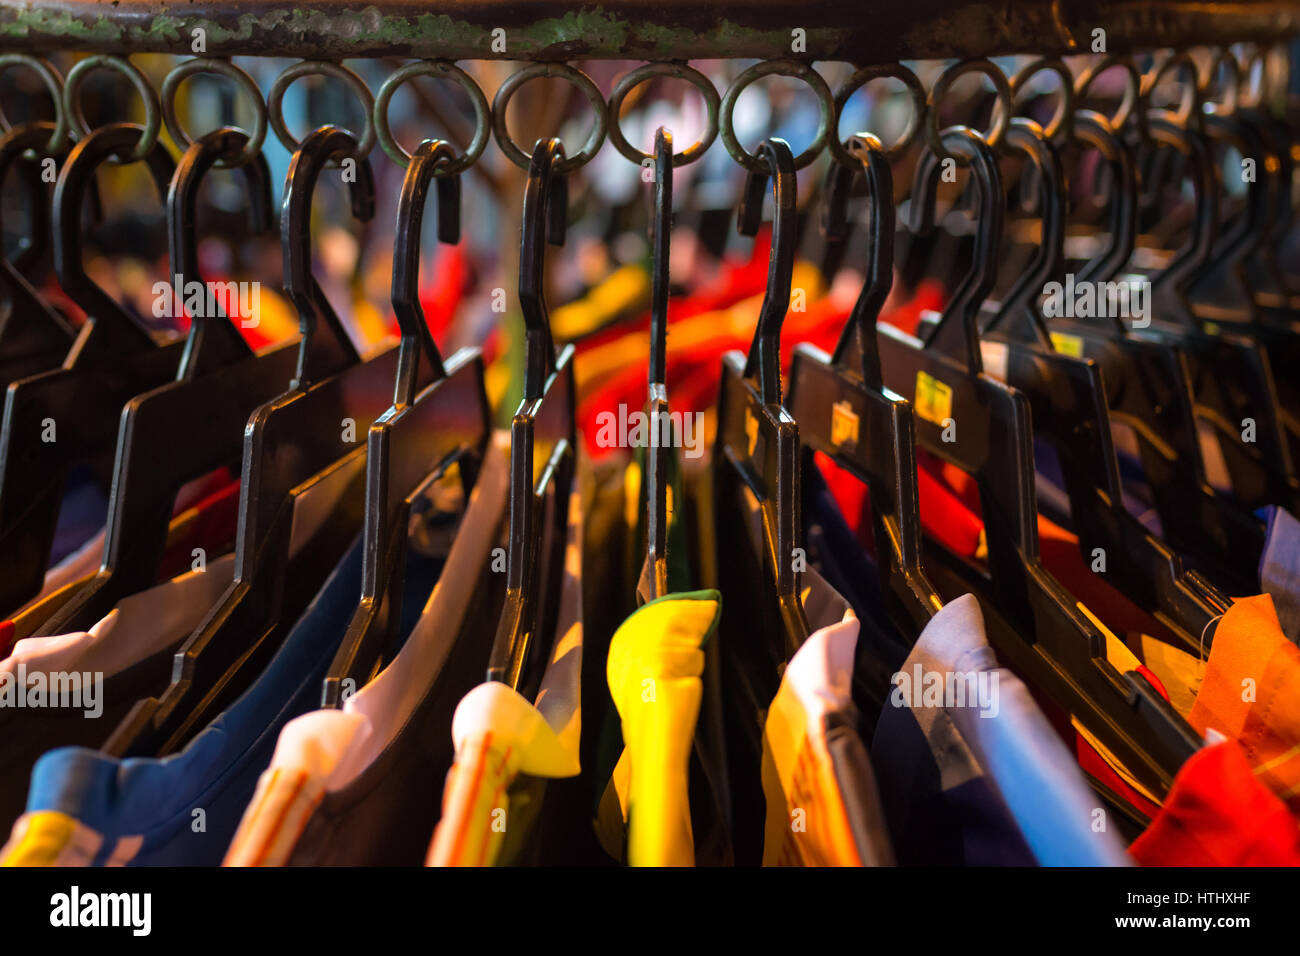 T-shirts and tops hanging on a clothes rail an Asian night market. Stock Photo